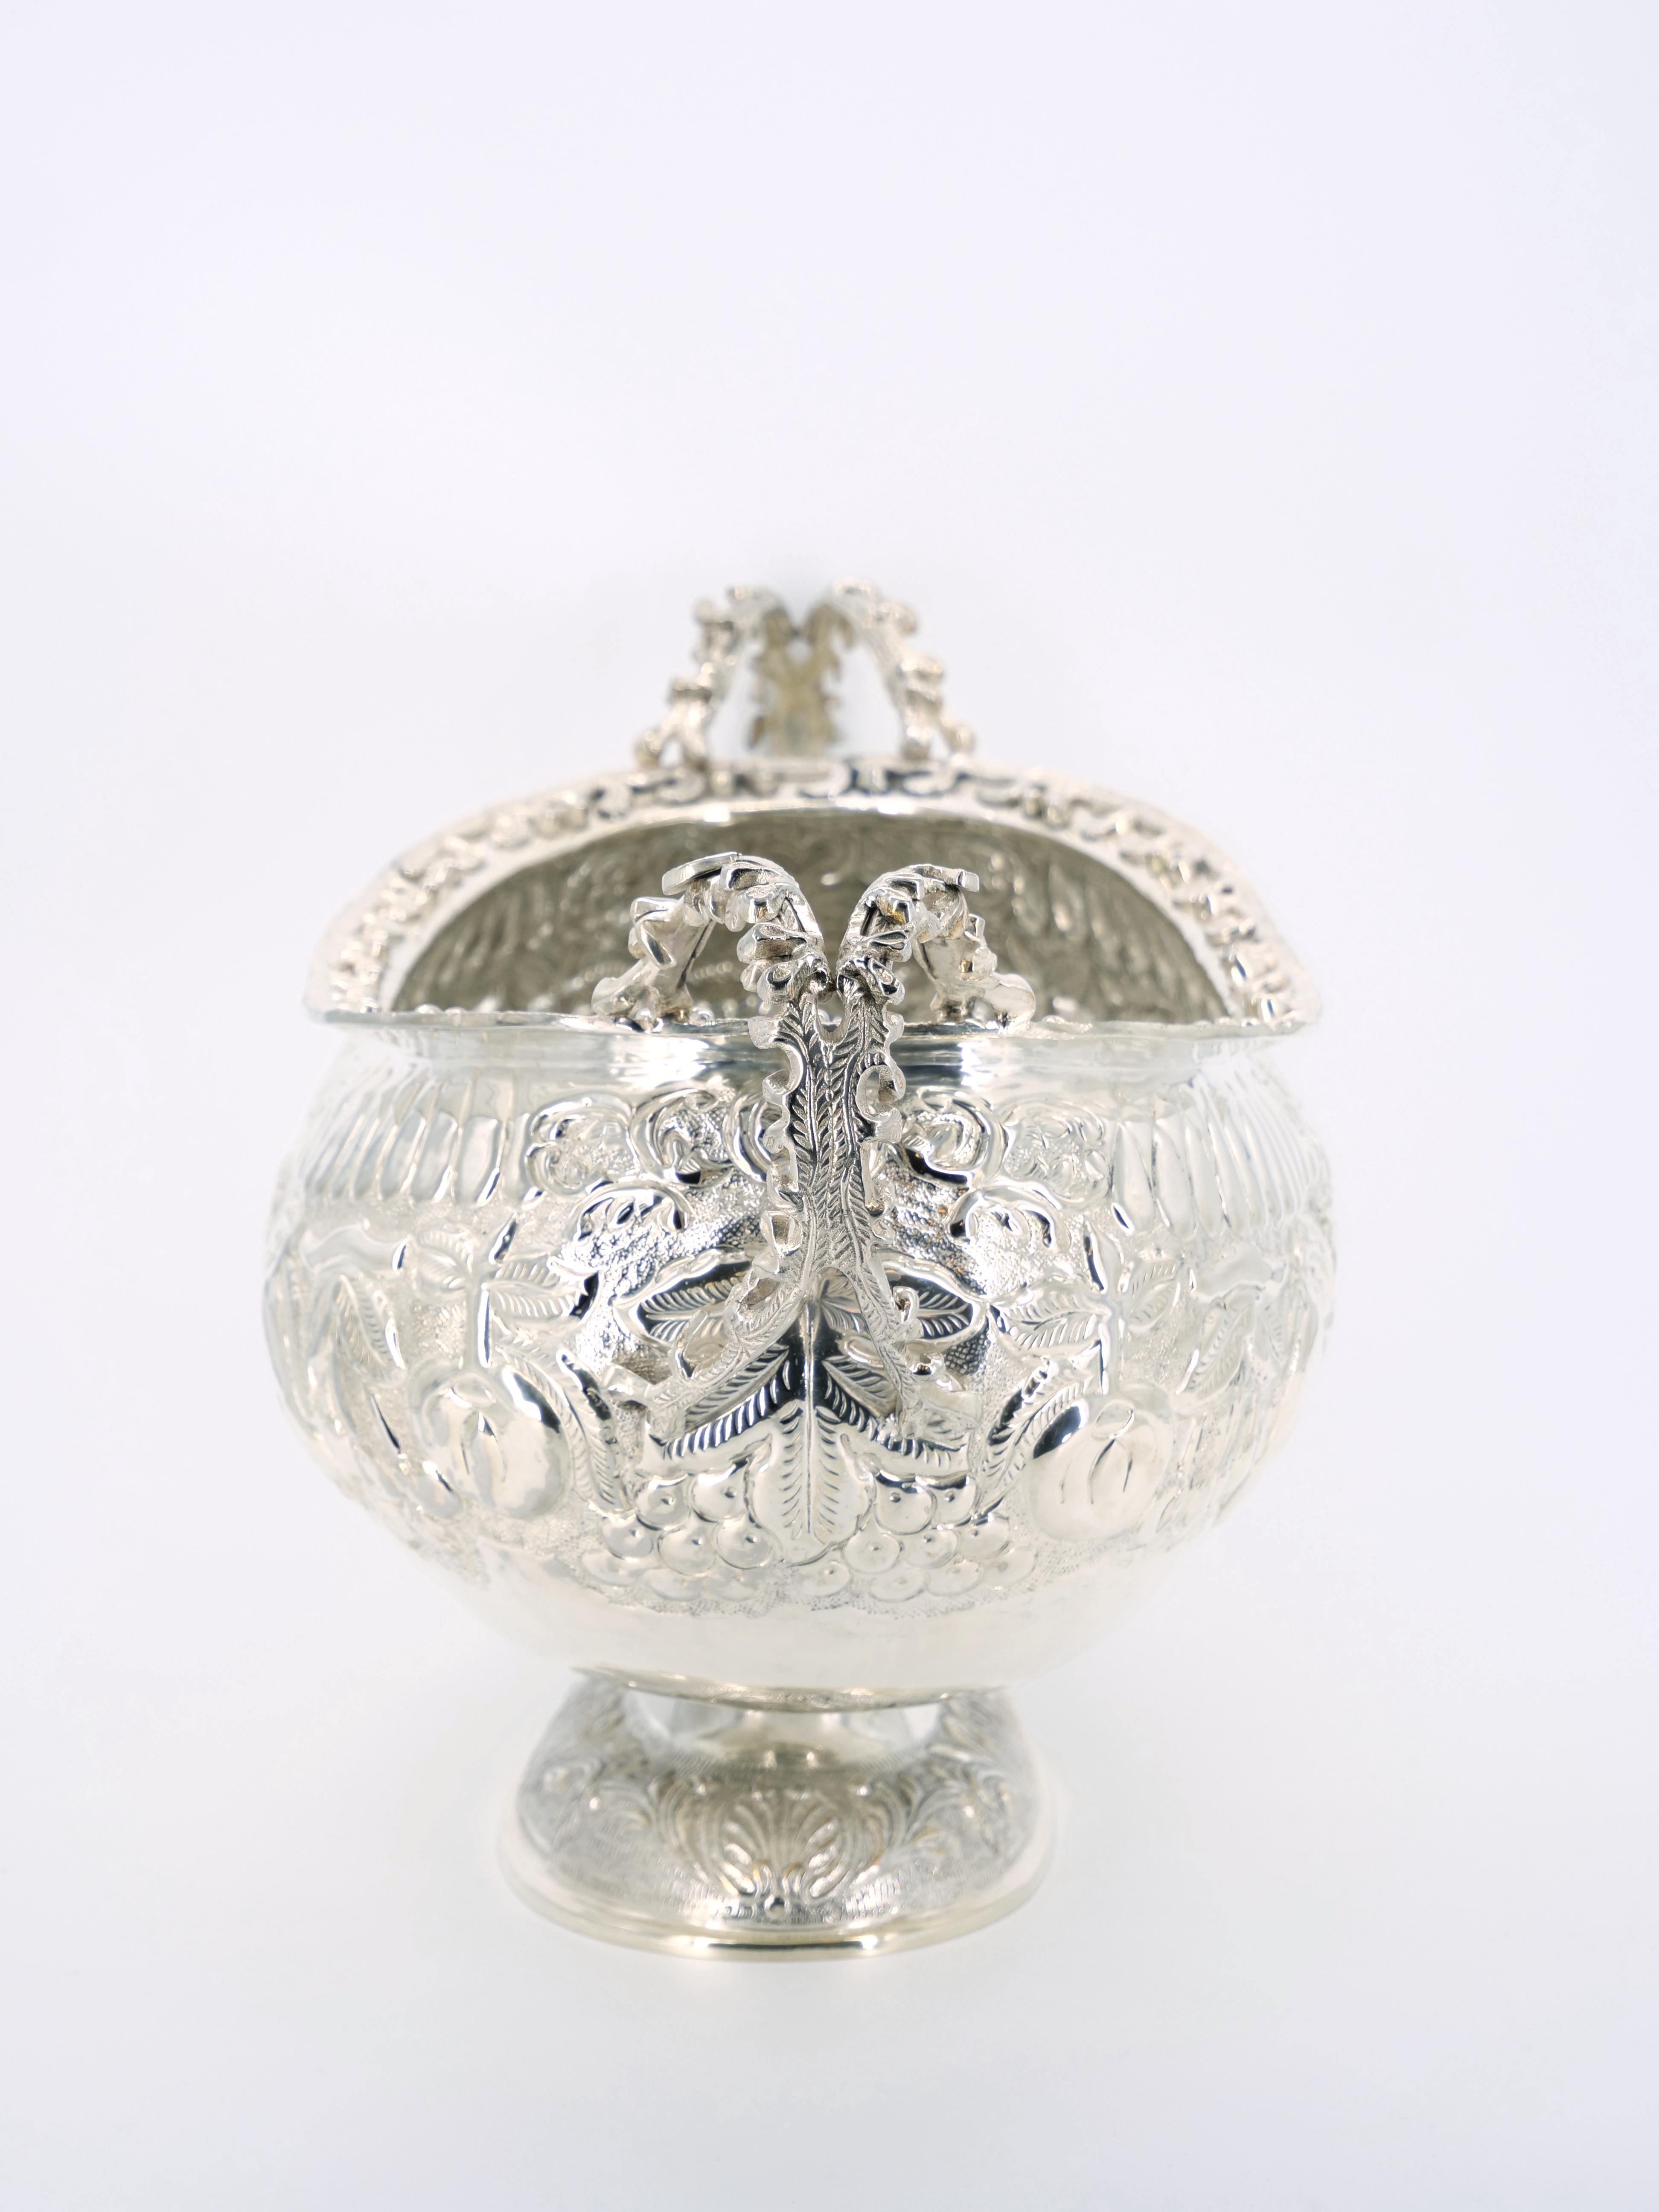 20th Century Large & Very Ornate Hand Crafted Silver Plate Champagne Cooler / Centerpiece For Sale